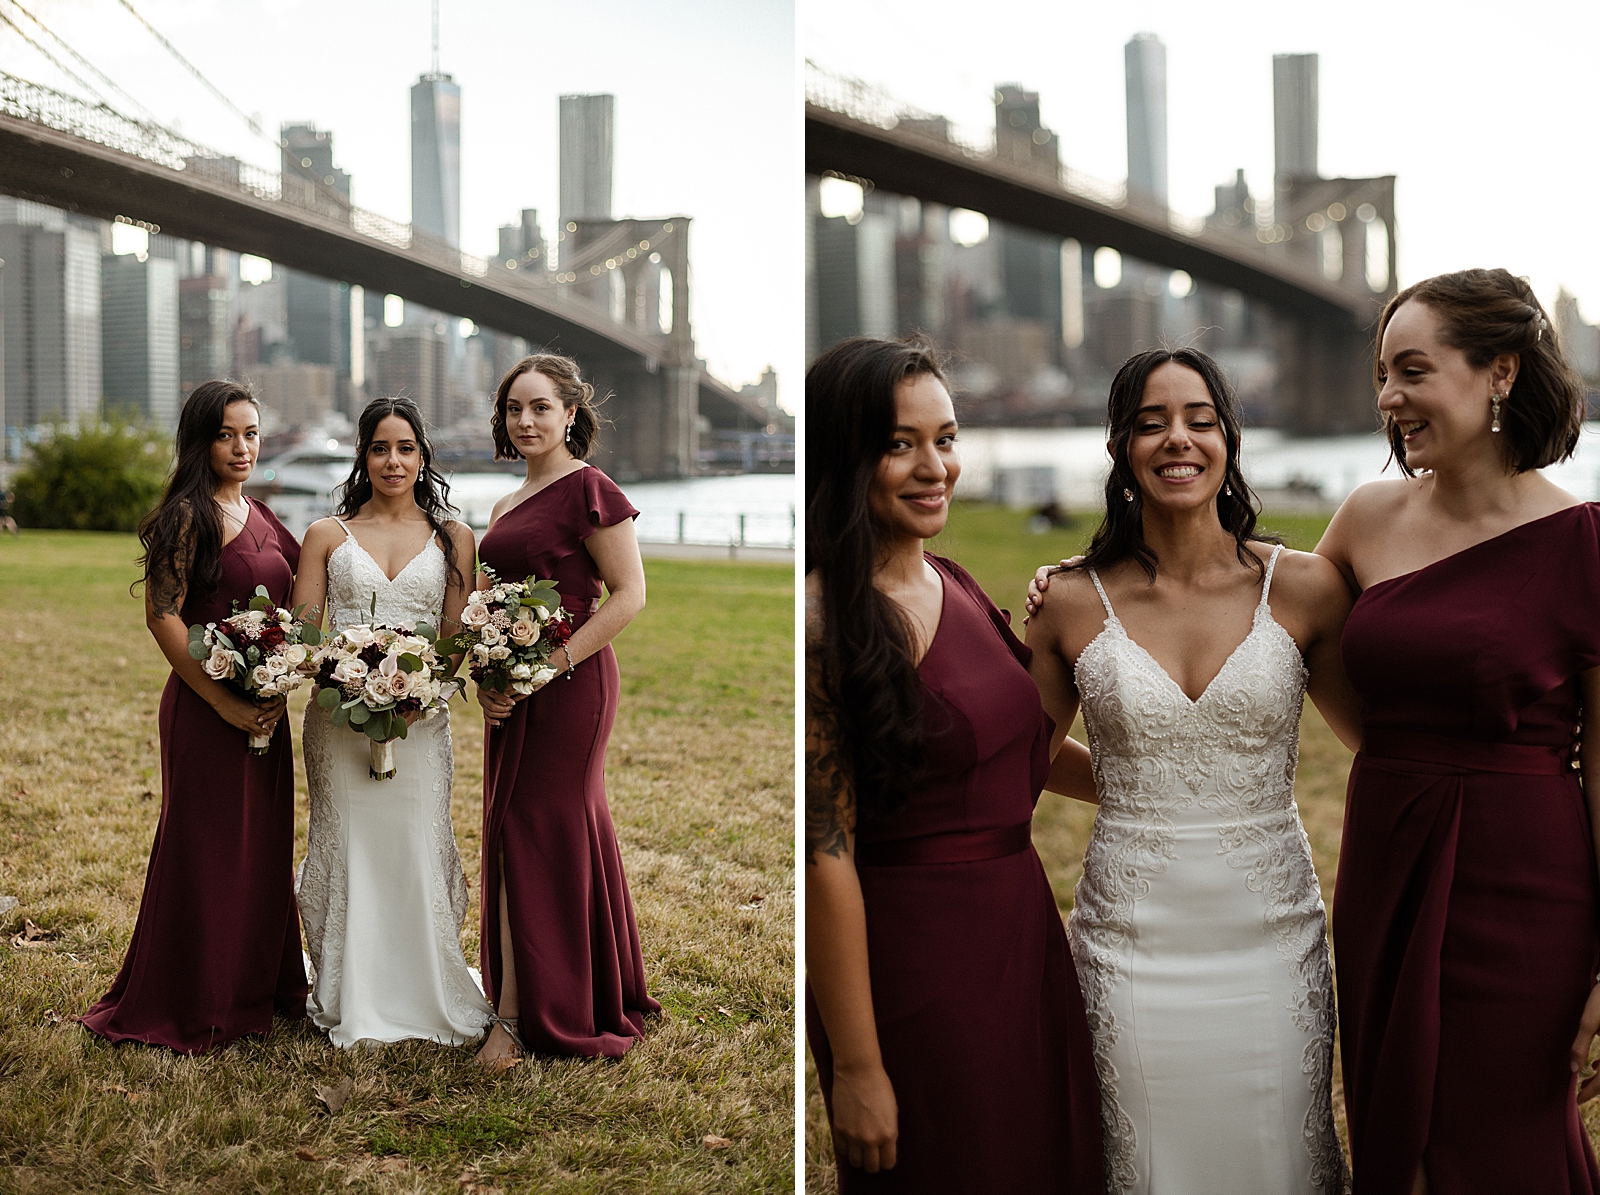 Bride with Bridesmaids with bouquets in hand portrait